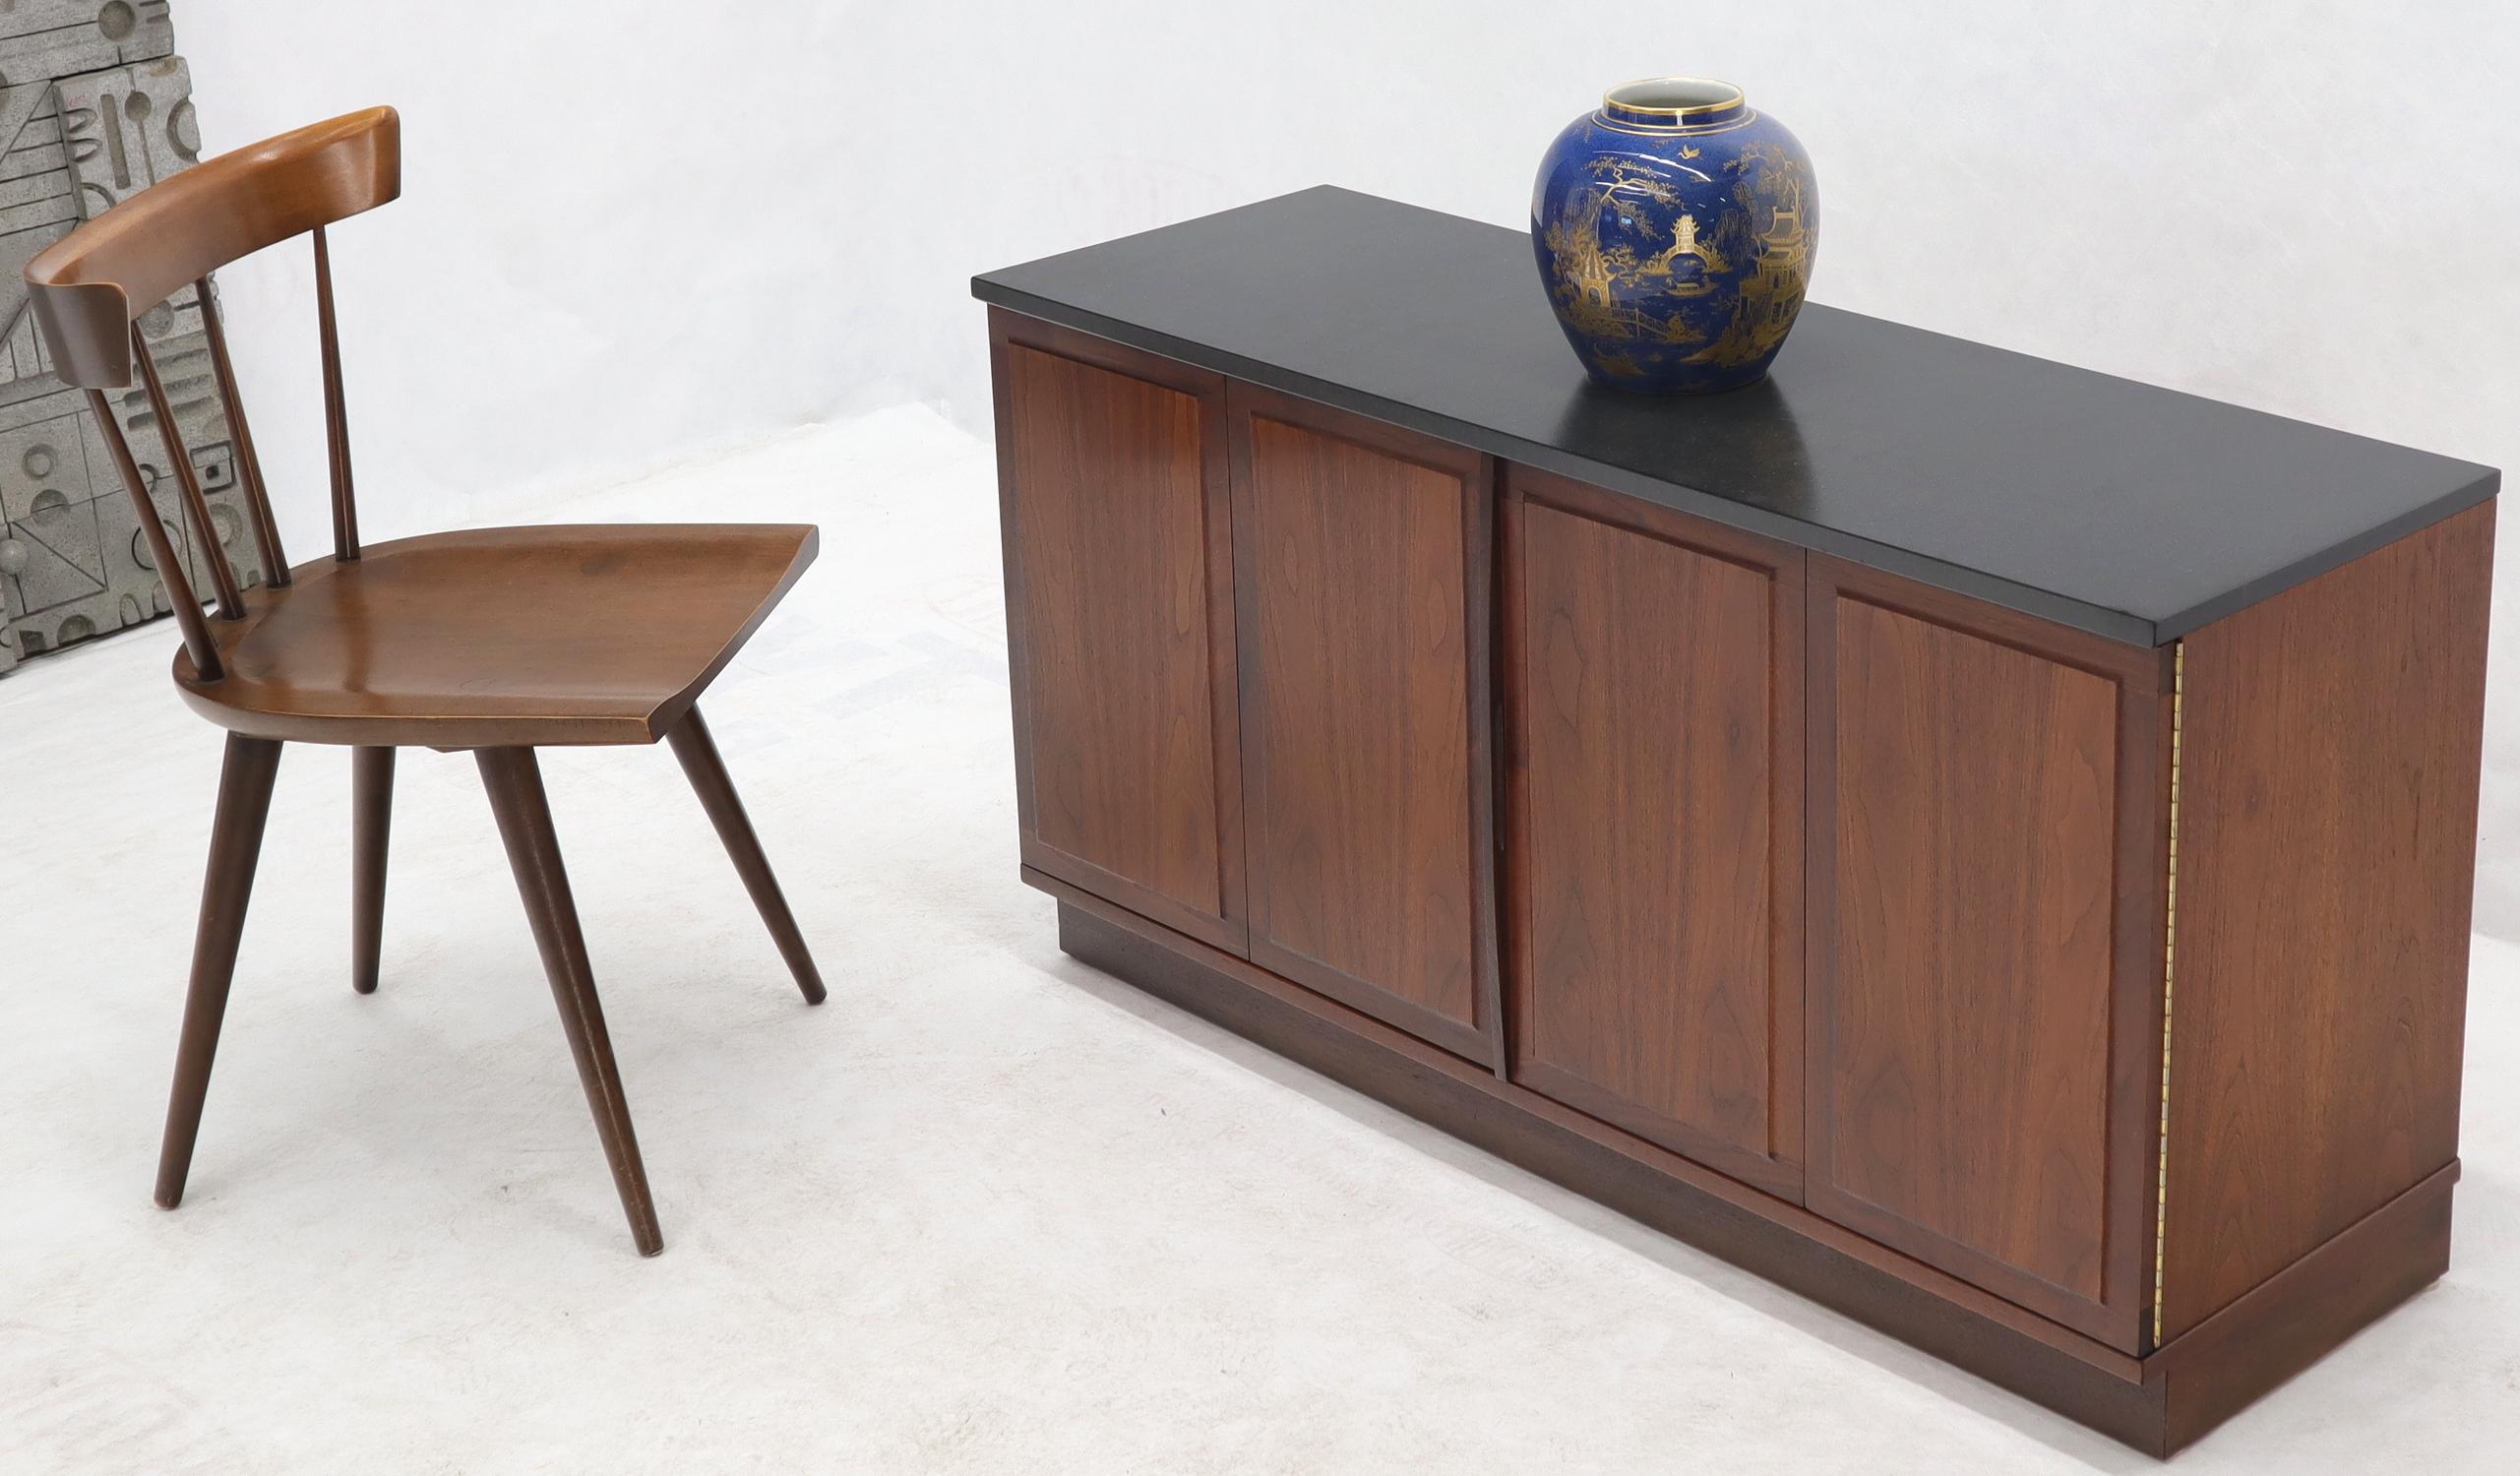 Small hall entry space cabinet credenza, TV stand alternative with slate top.
Mid-Century Modern circa 1970s Milo Baughman style piece.